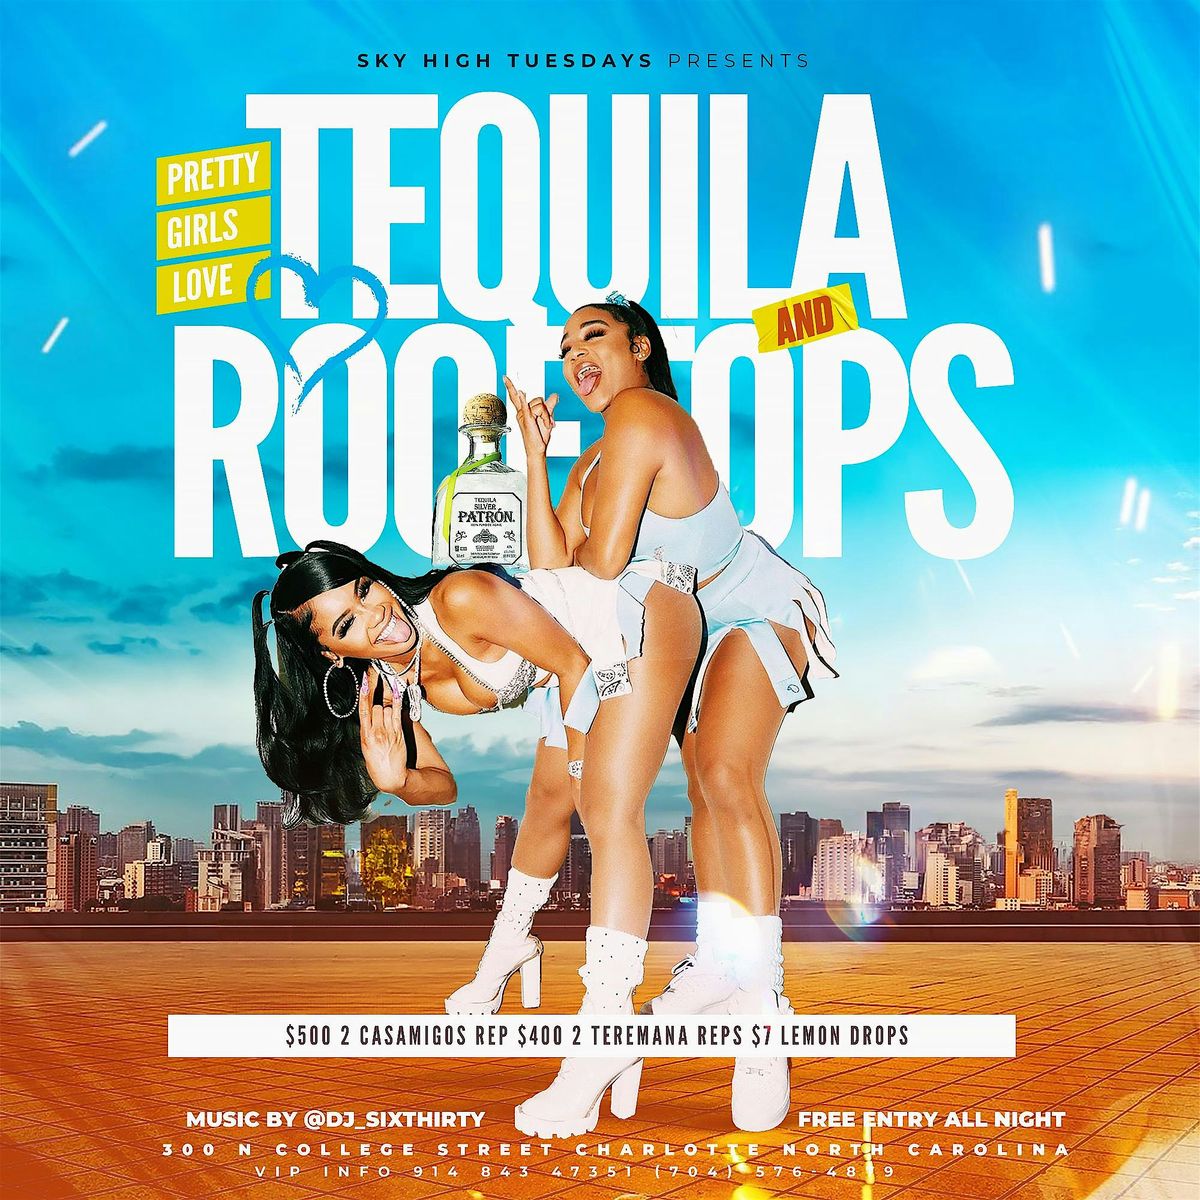 Sky high Tuesdays! Pretty girls love tequila and rooftops! $400 2 bottles